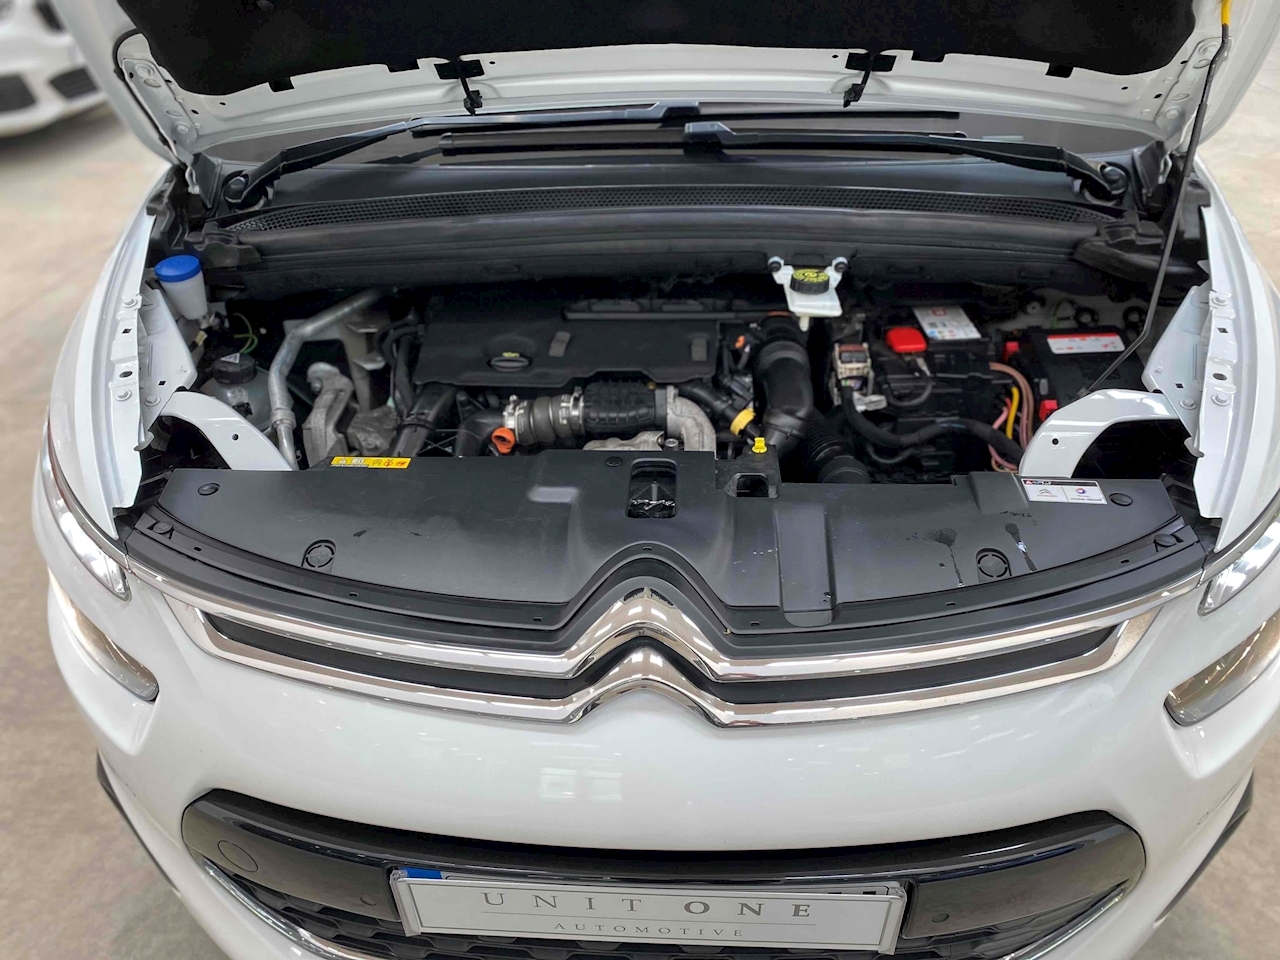 Citroen C4 Picasso technical specifications and fuel consumption